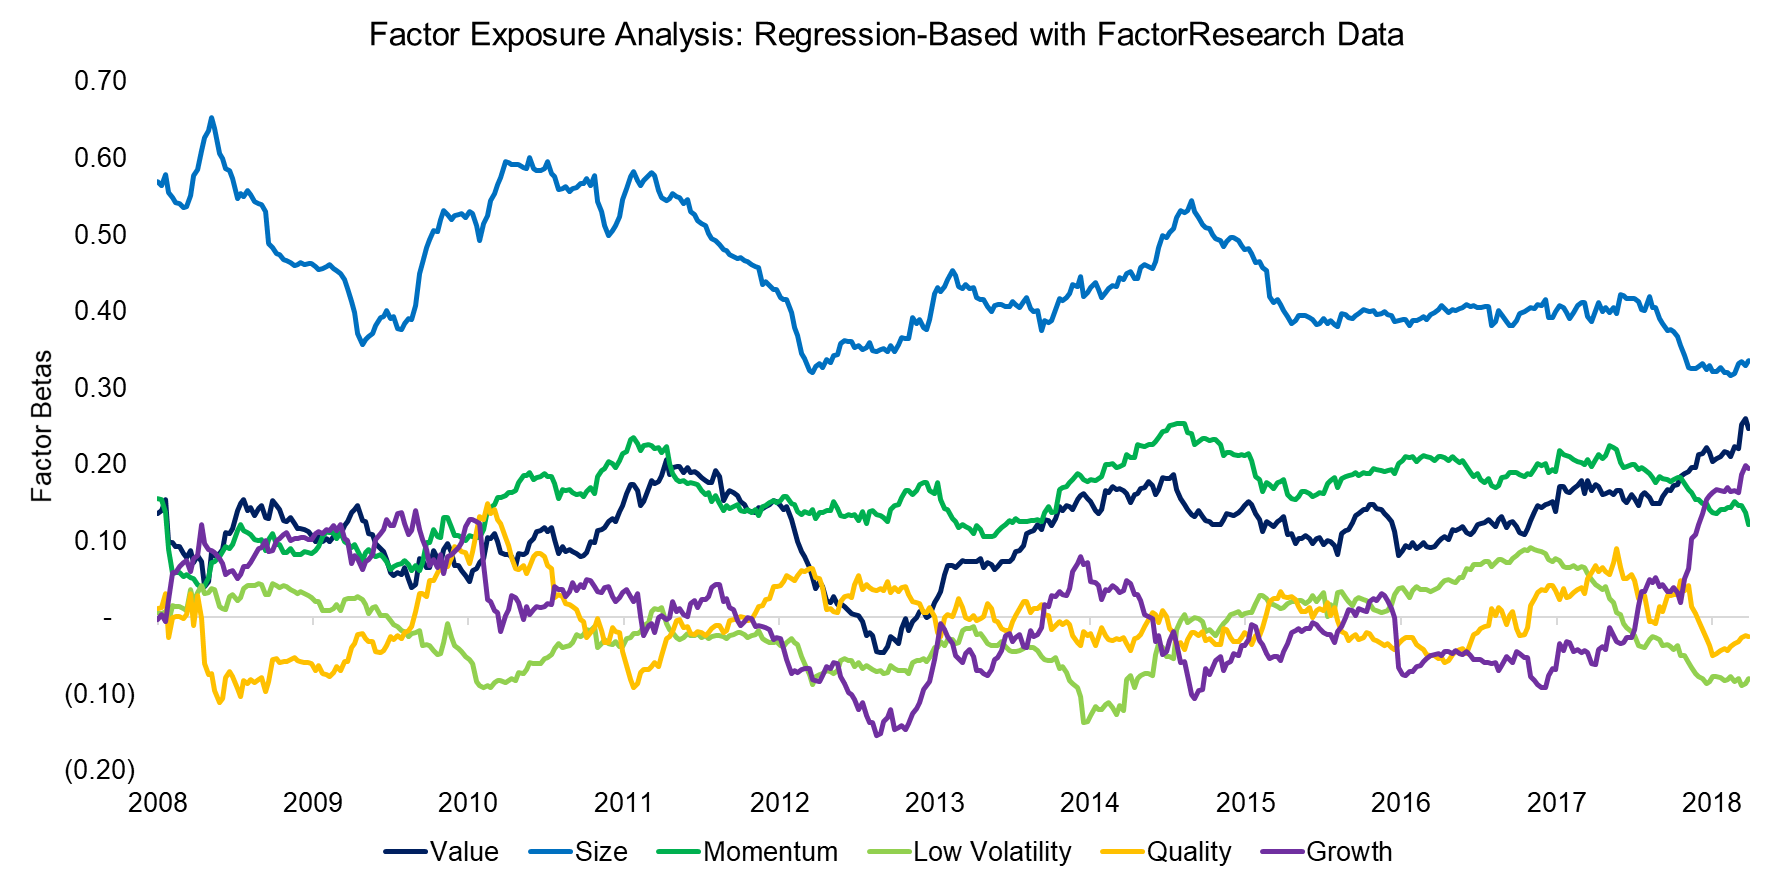 Factor Exposure Analysis Regression-Based with FactorResearch Data